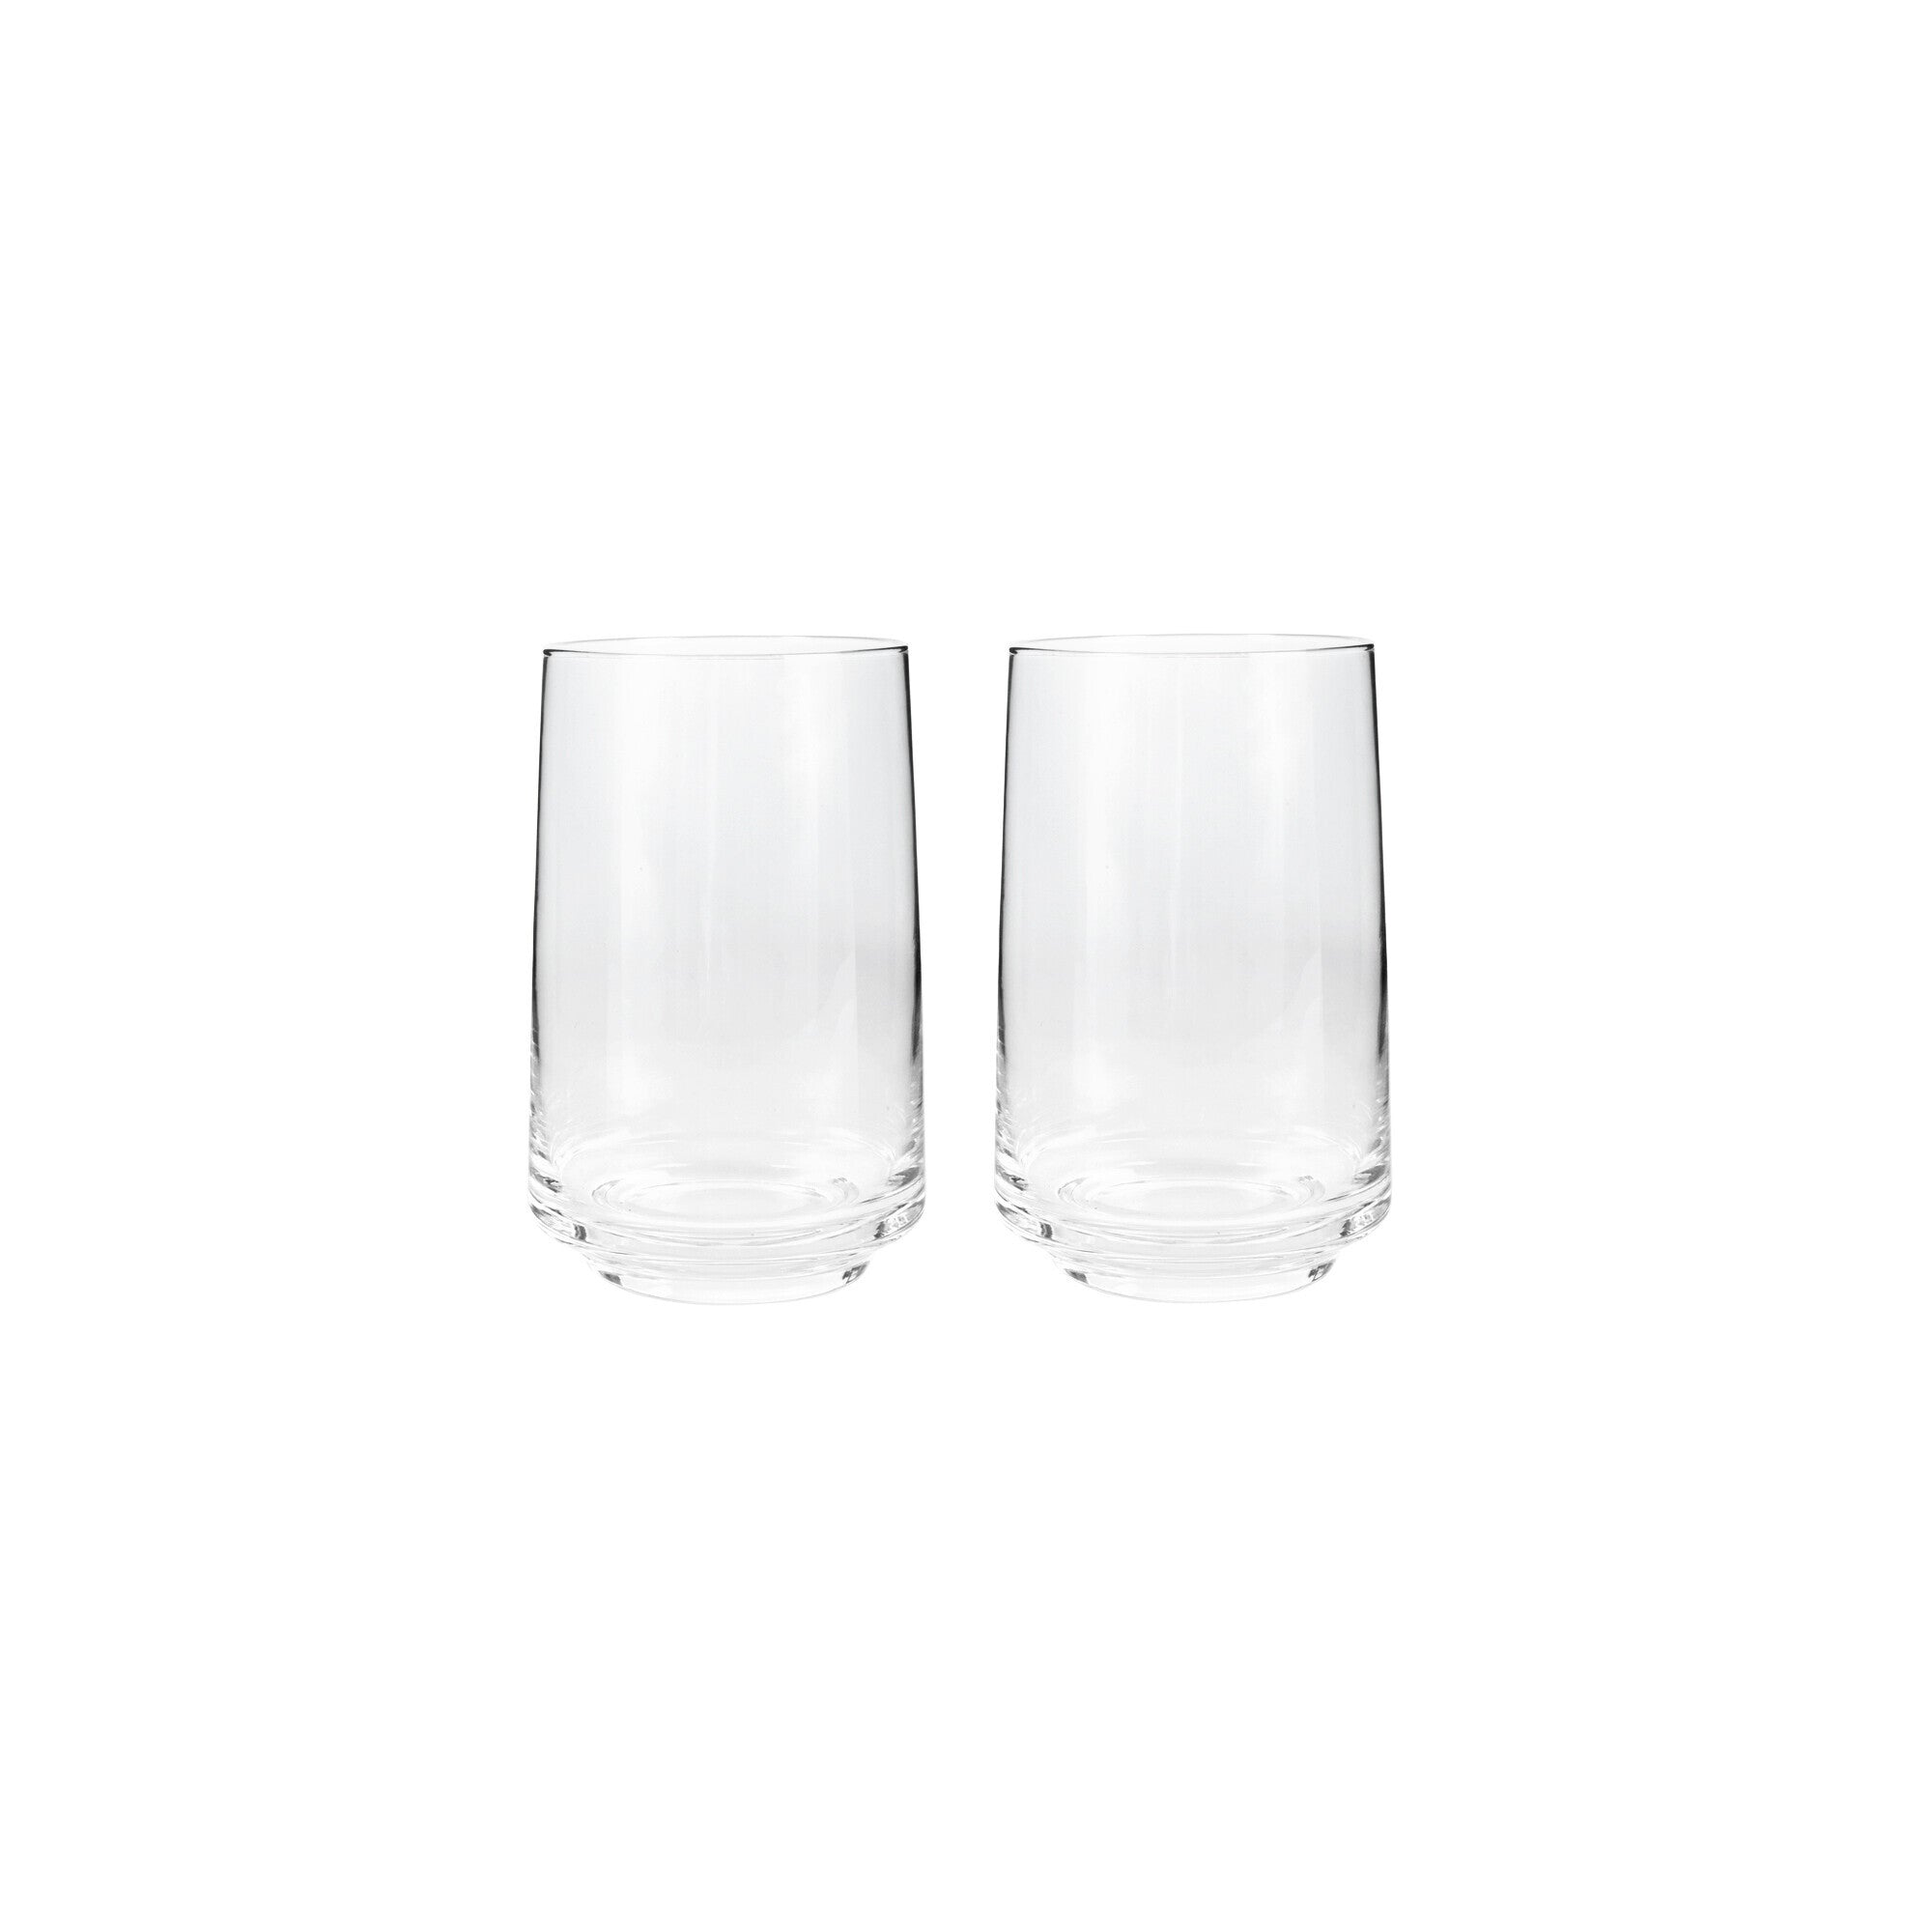 Denby - Set of 2 Clear Large Tumblers